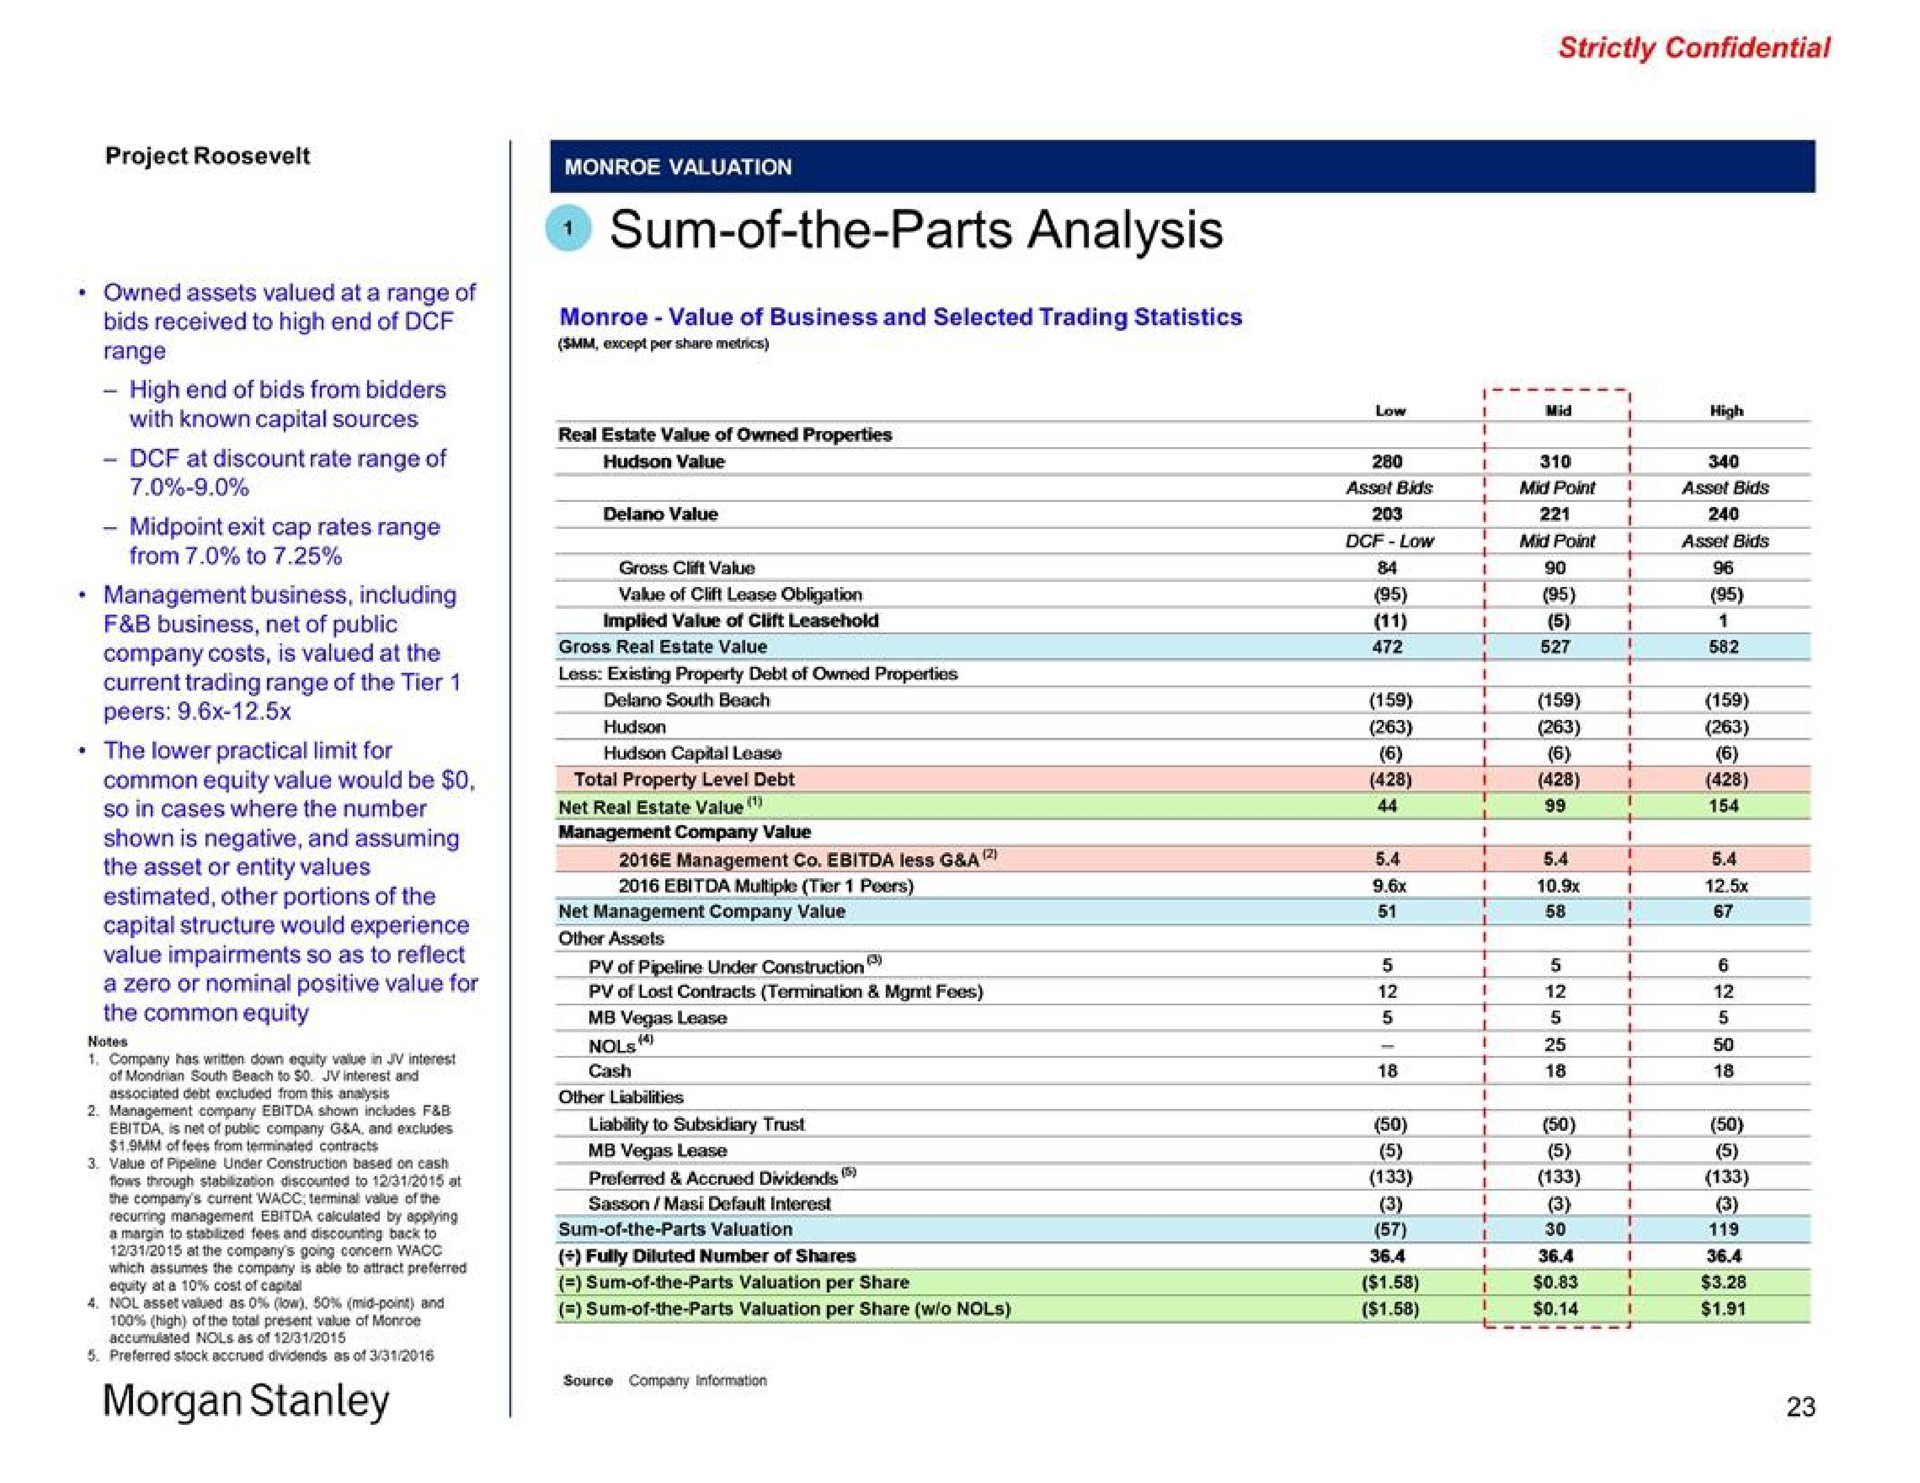 morgan sum of the parts analysis a accrued dividends sum of the parts valuation per share | Morgan Stanley